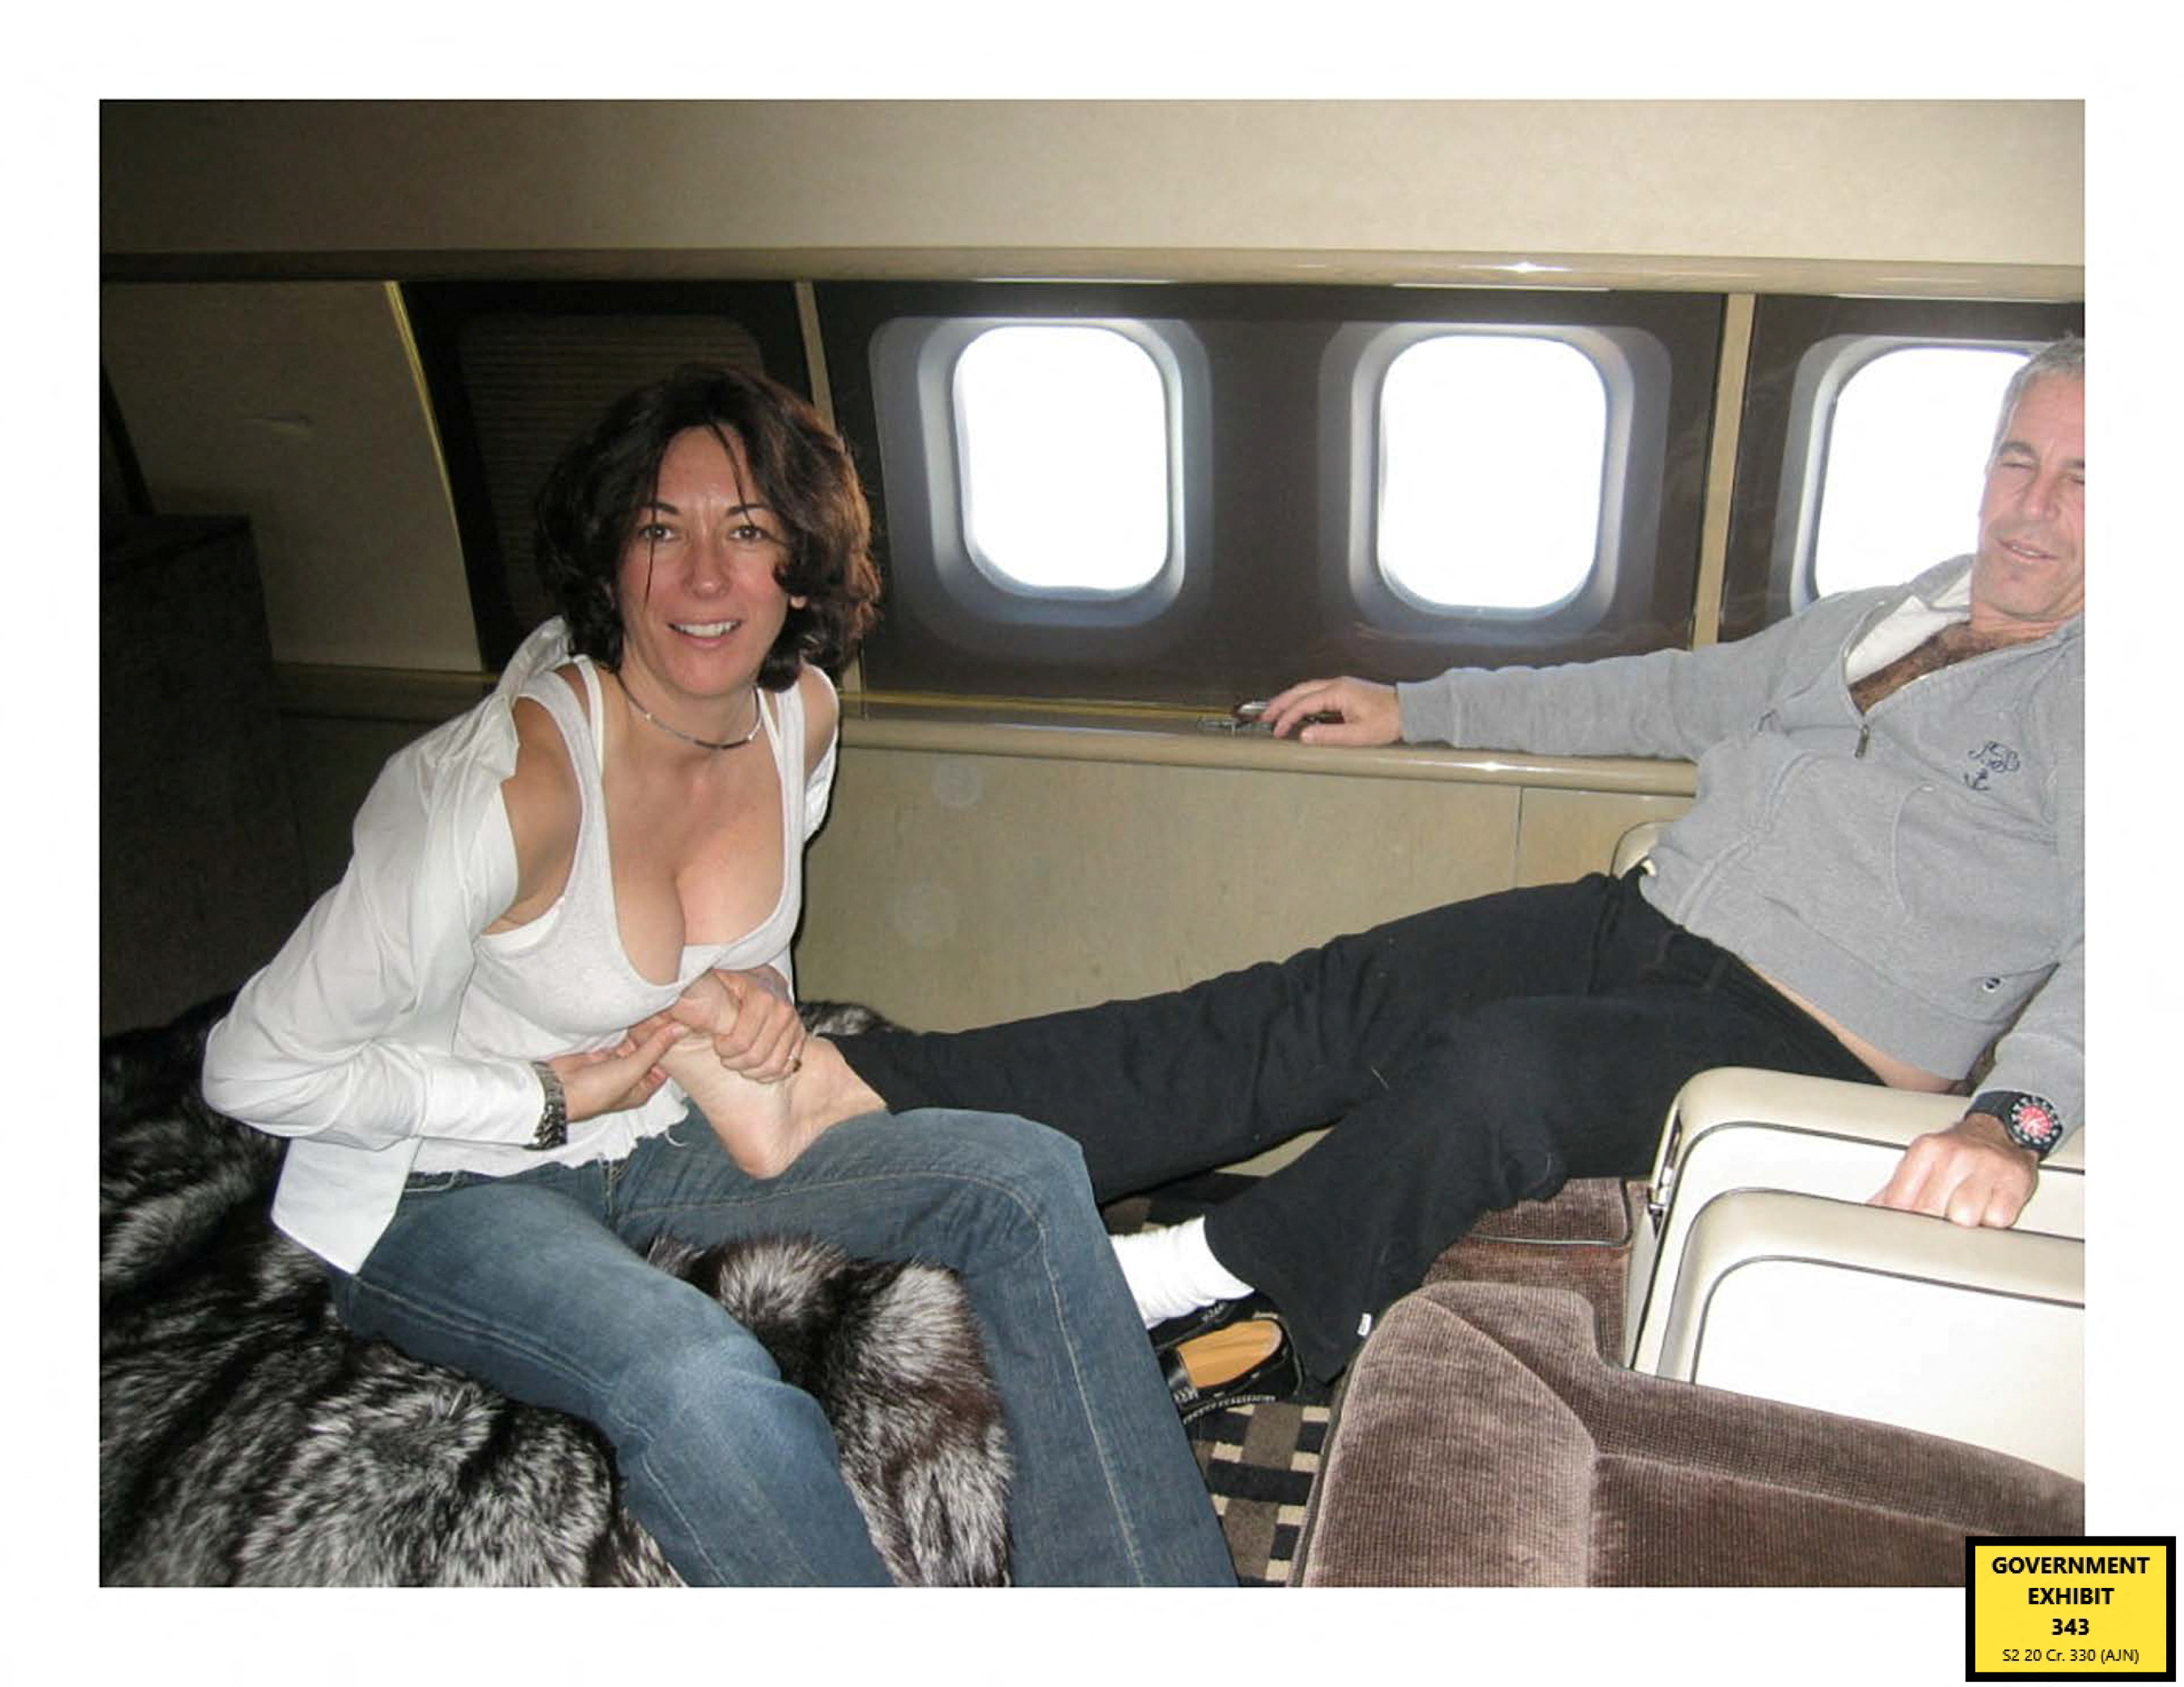 An undated photo shows Jeffrey Epstein and Ghislaine Maxwell. The photo was entered into evidence by the U.S. Attorney's Office on December 7, 2021 during the trial of Ghislaine Maxwell, the Jeffrey Epstein associate accused of sex trafficking, in New York City.   Courtesy U.S. Attorney's Office/Handout via REUTERS ATTENTION EDITORS - THIS PICTURE WAS PROVIDED BY A THIRD PARTY. NO RESALES. NO ARCHIVES. FOR USE WITH STORY PEOPLE-GHISLAINE MAXWELL/ ONLY  ?